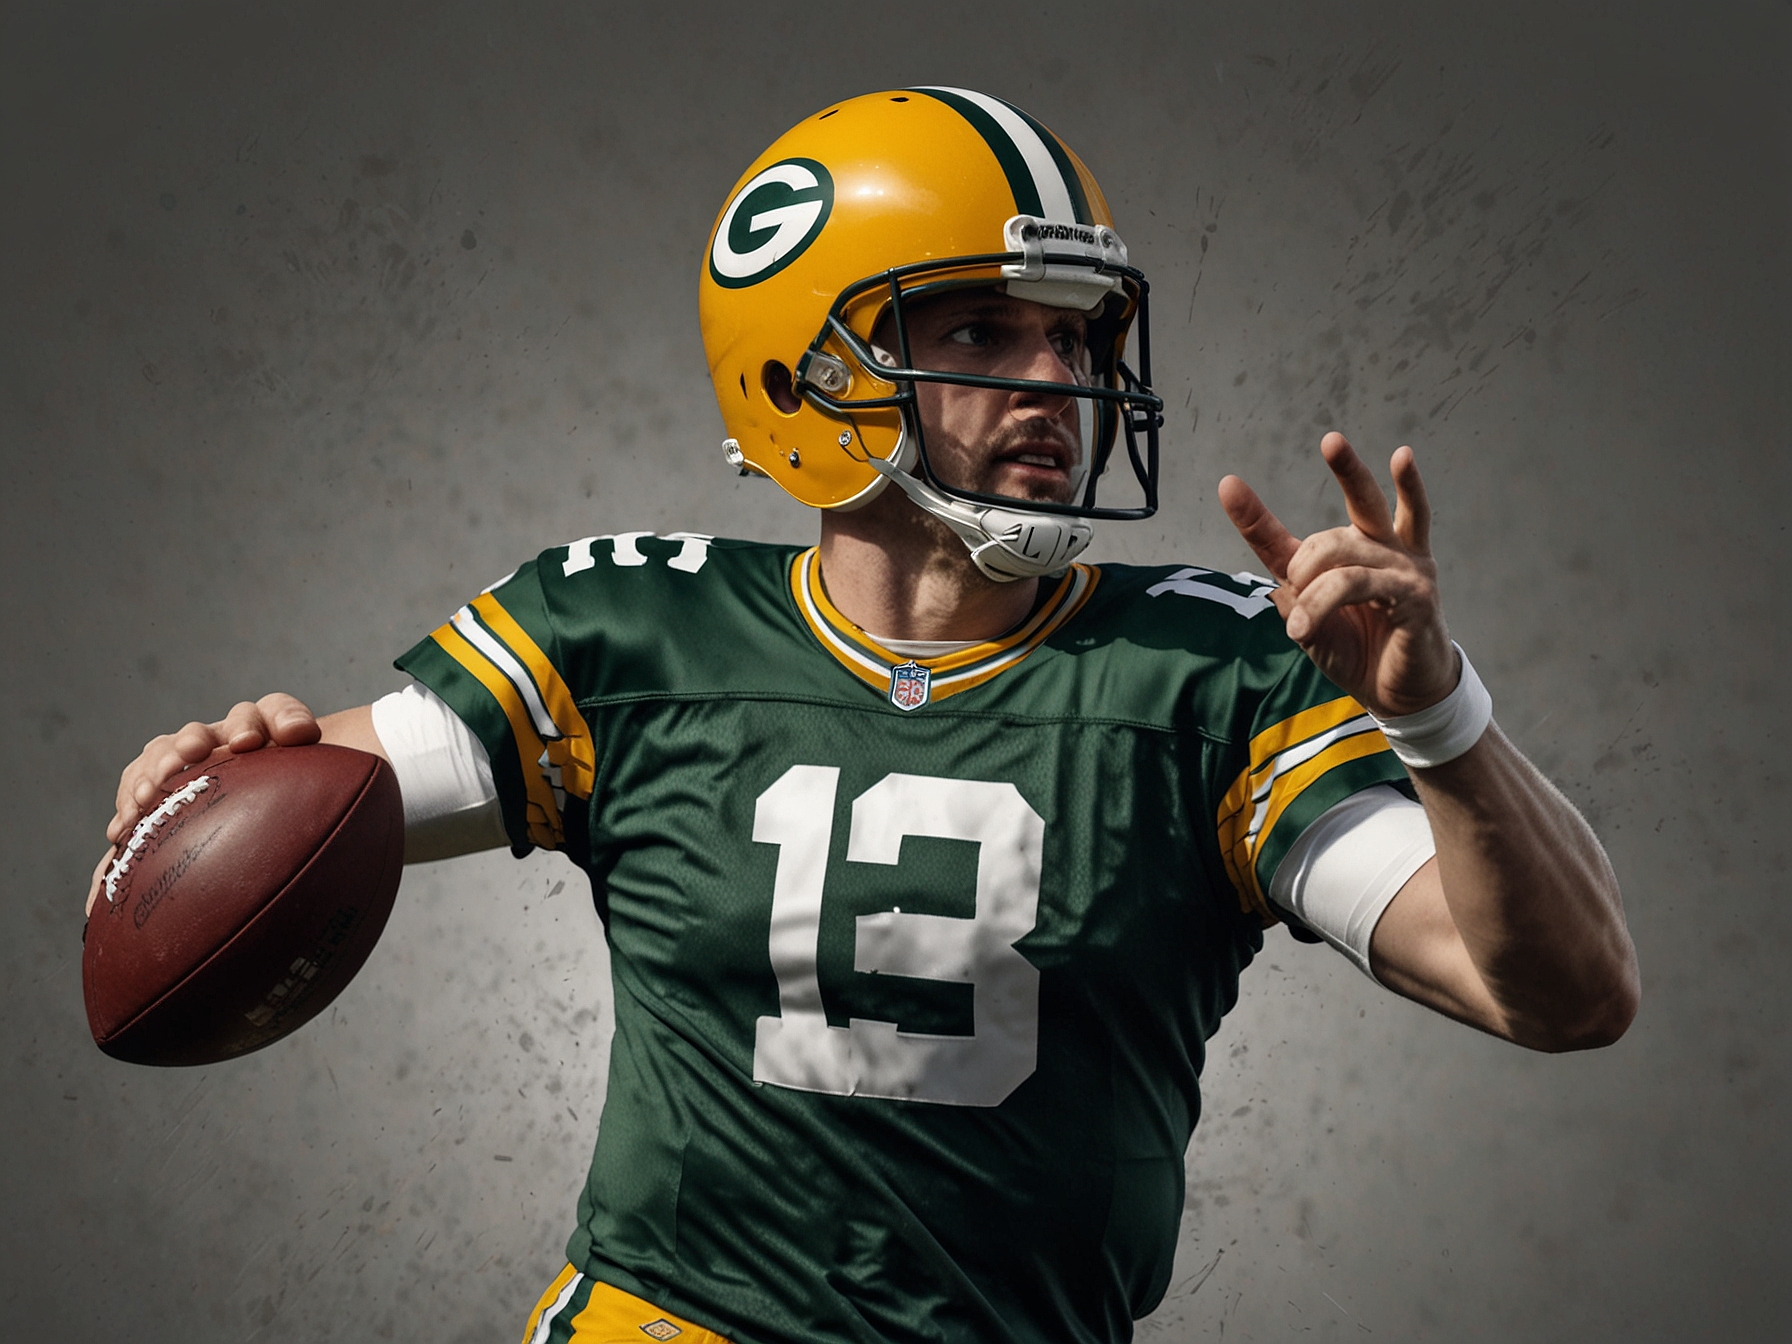 An illustration of the Packers' quarterback making a precise throw during a crucial game, showcasing his leadership and decision-making abilities on the field.